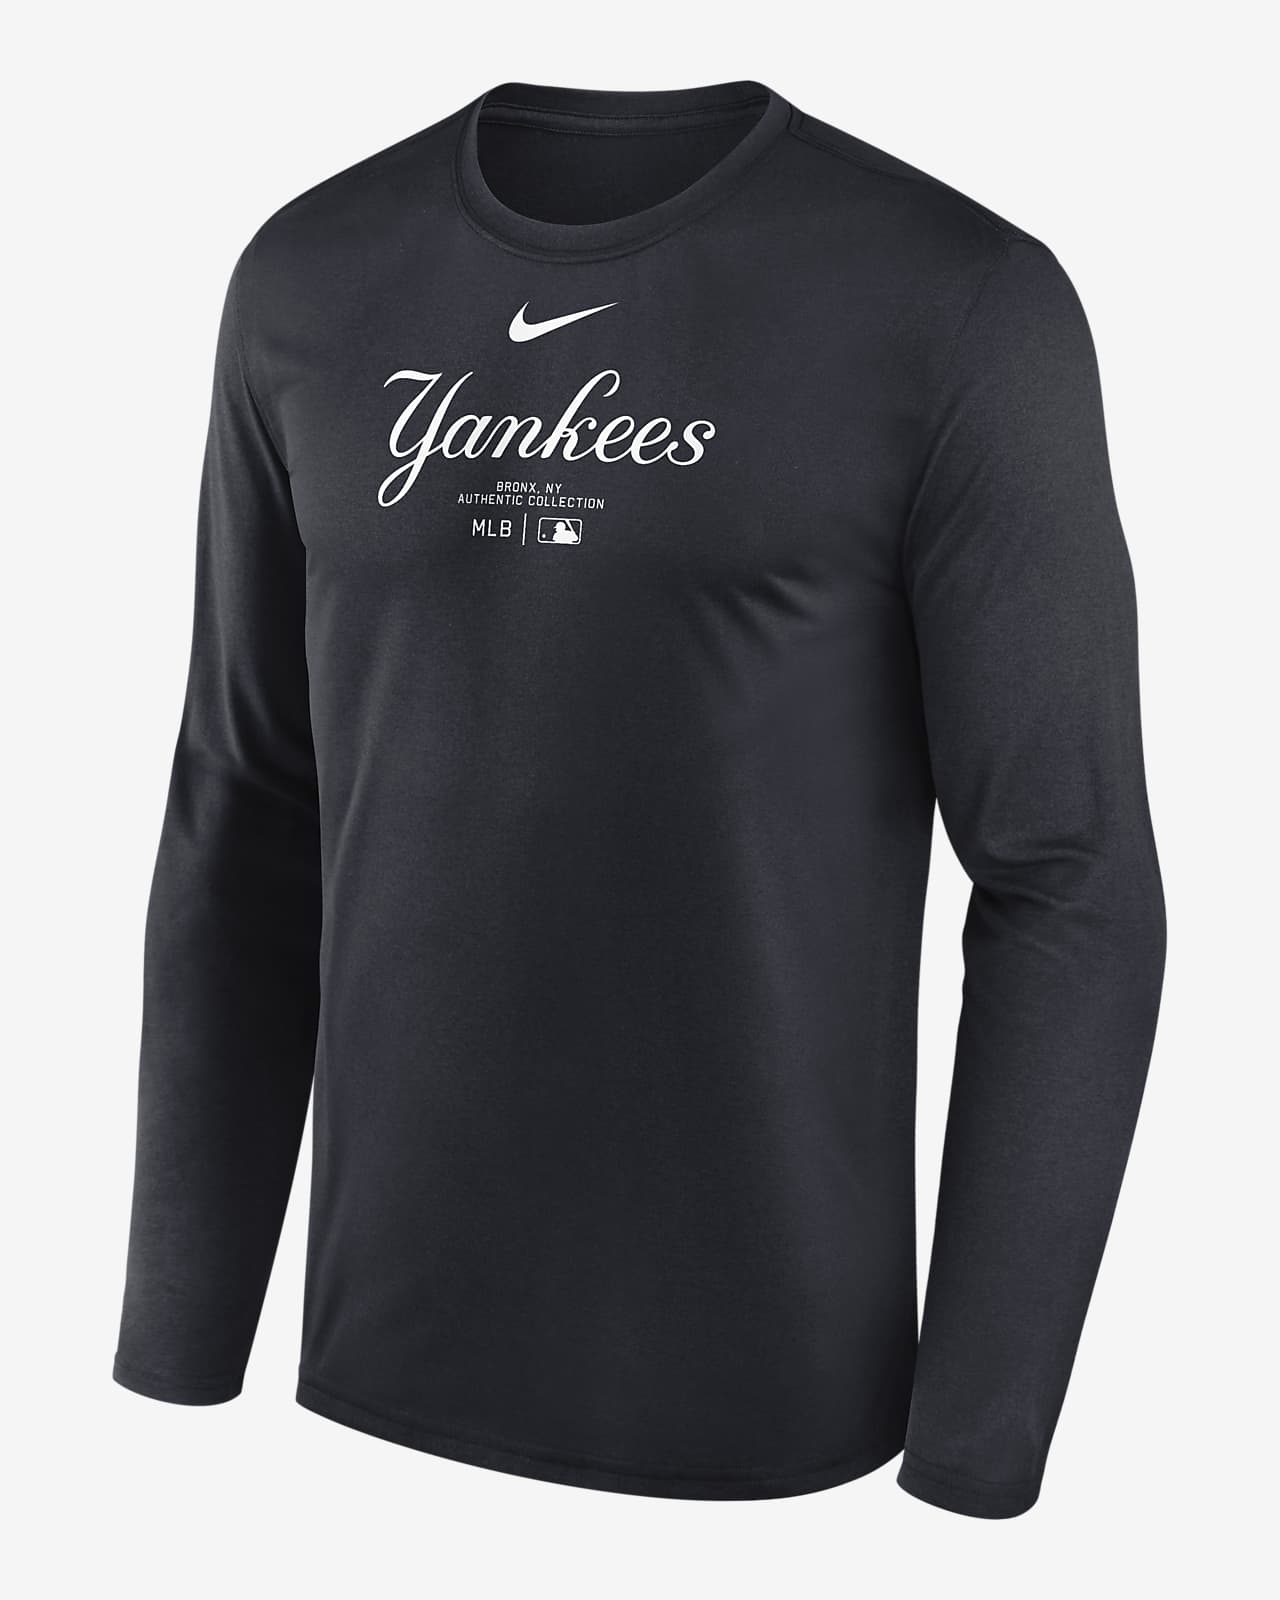 New York Yankees Authentic Collection Practice Men's Nike Dri-FIT MLB Long-Sleeve T-Shirt